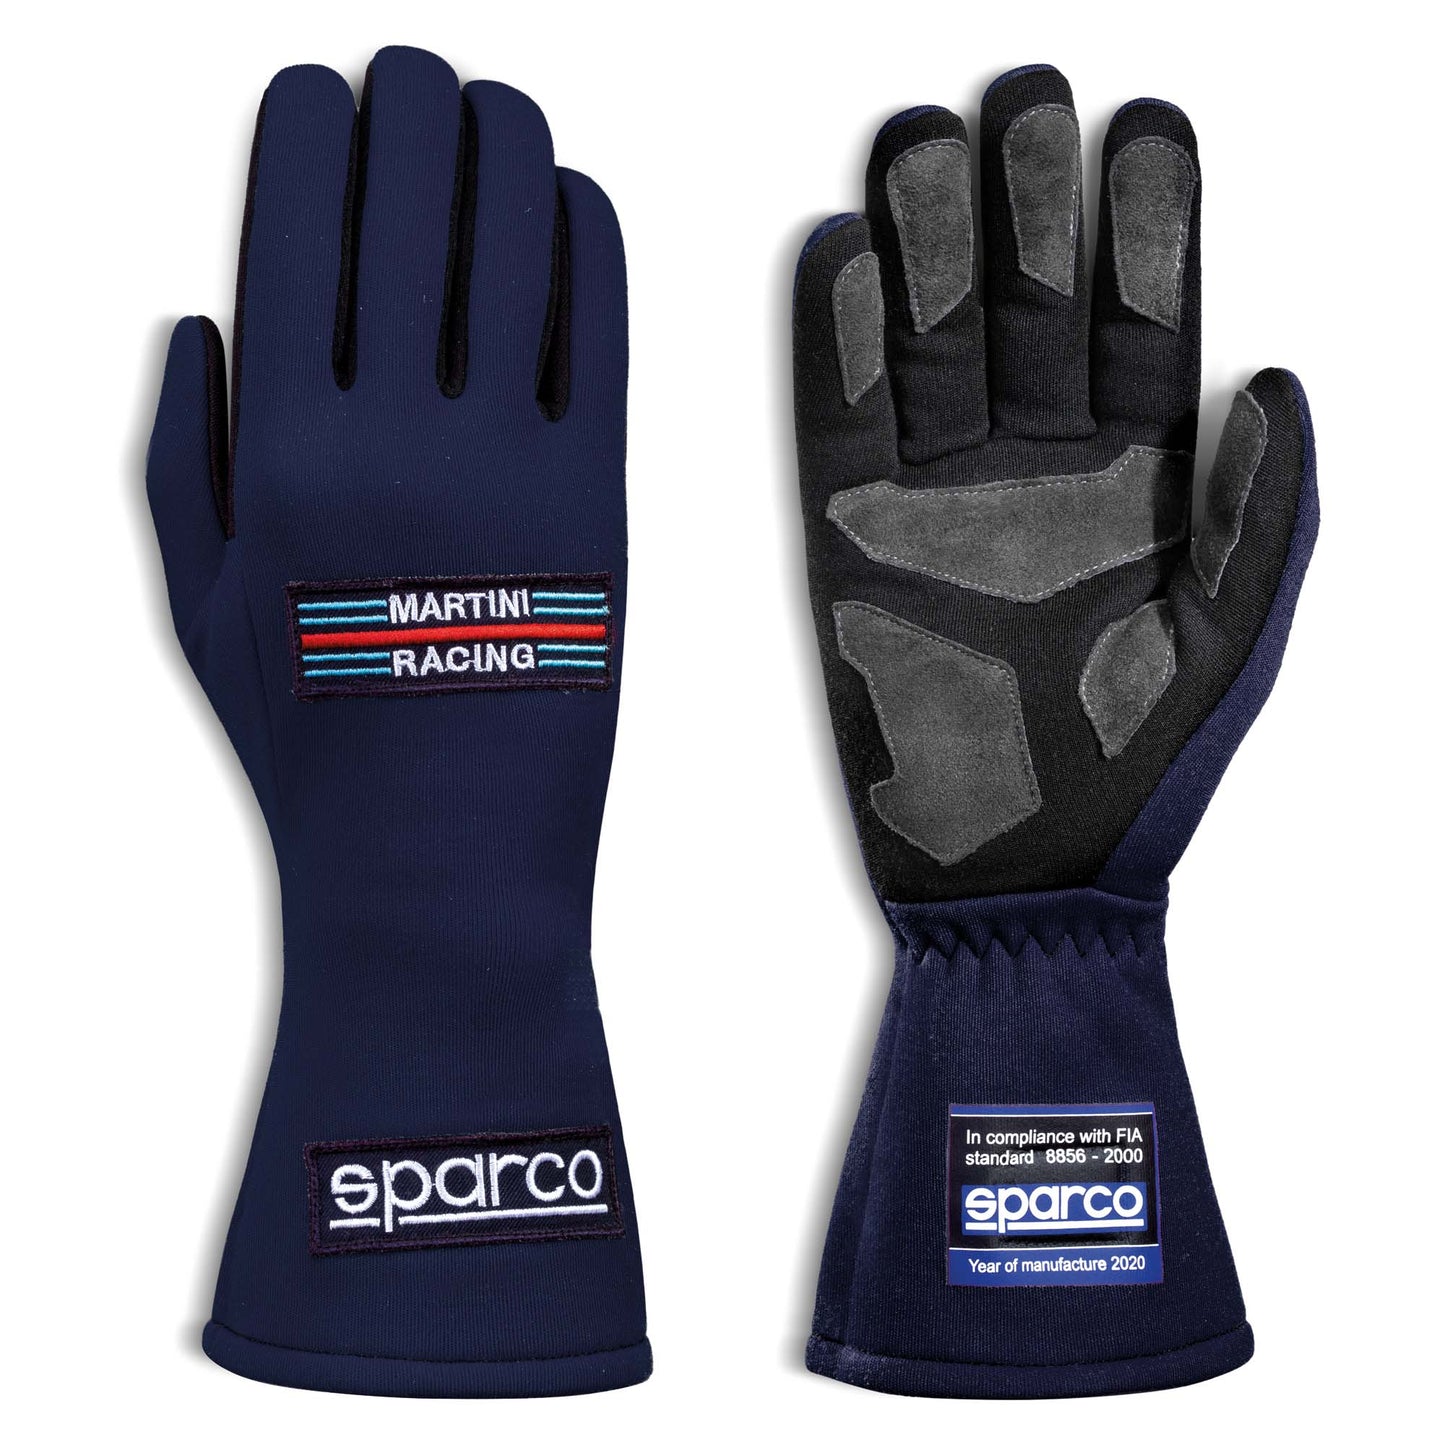 Sparco Martini Land Racing Gloves - 2021 Model